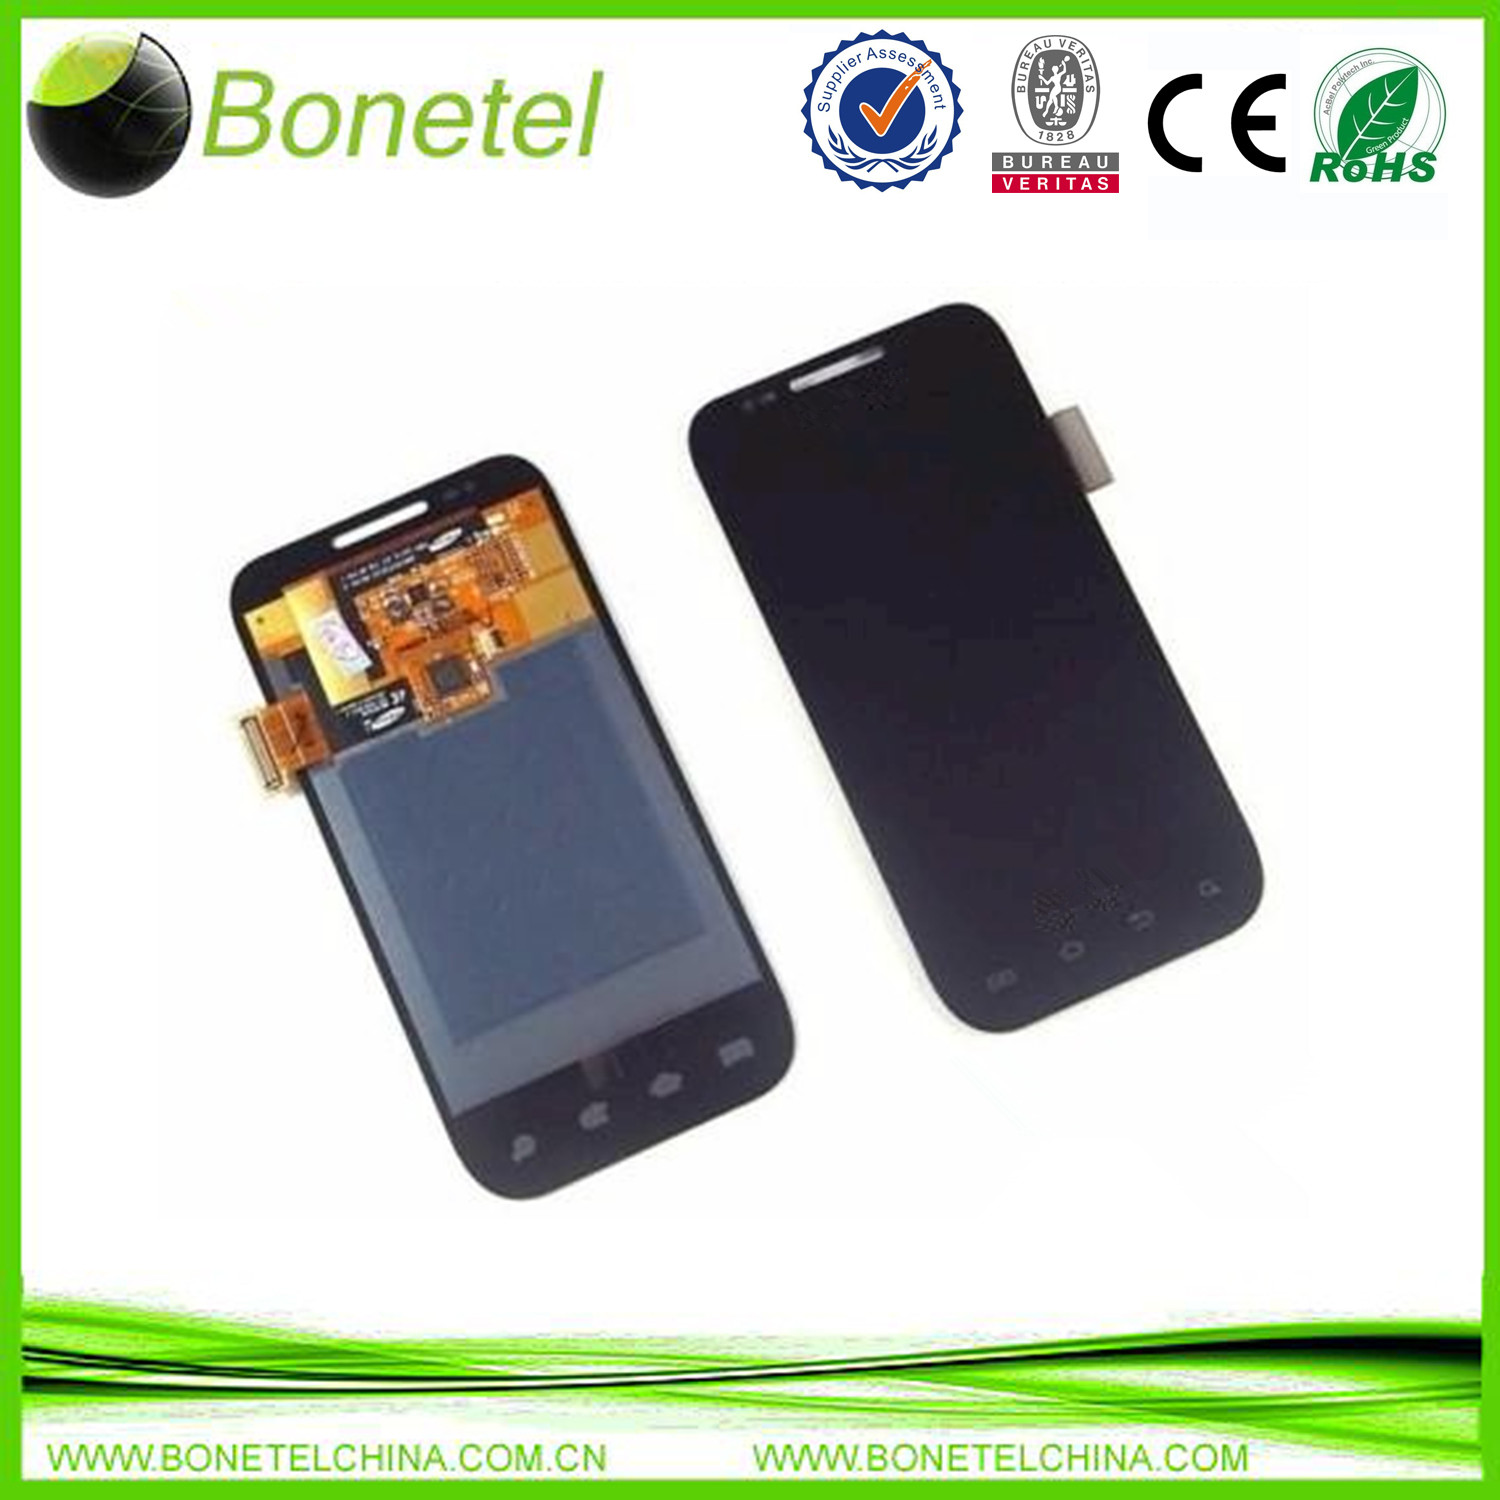 Samsung Fascinate i500 LCD Display + Digitizer Touch Assembly